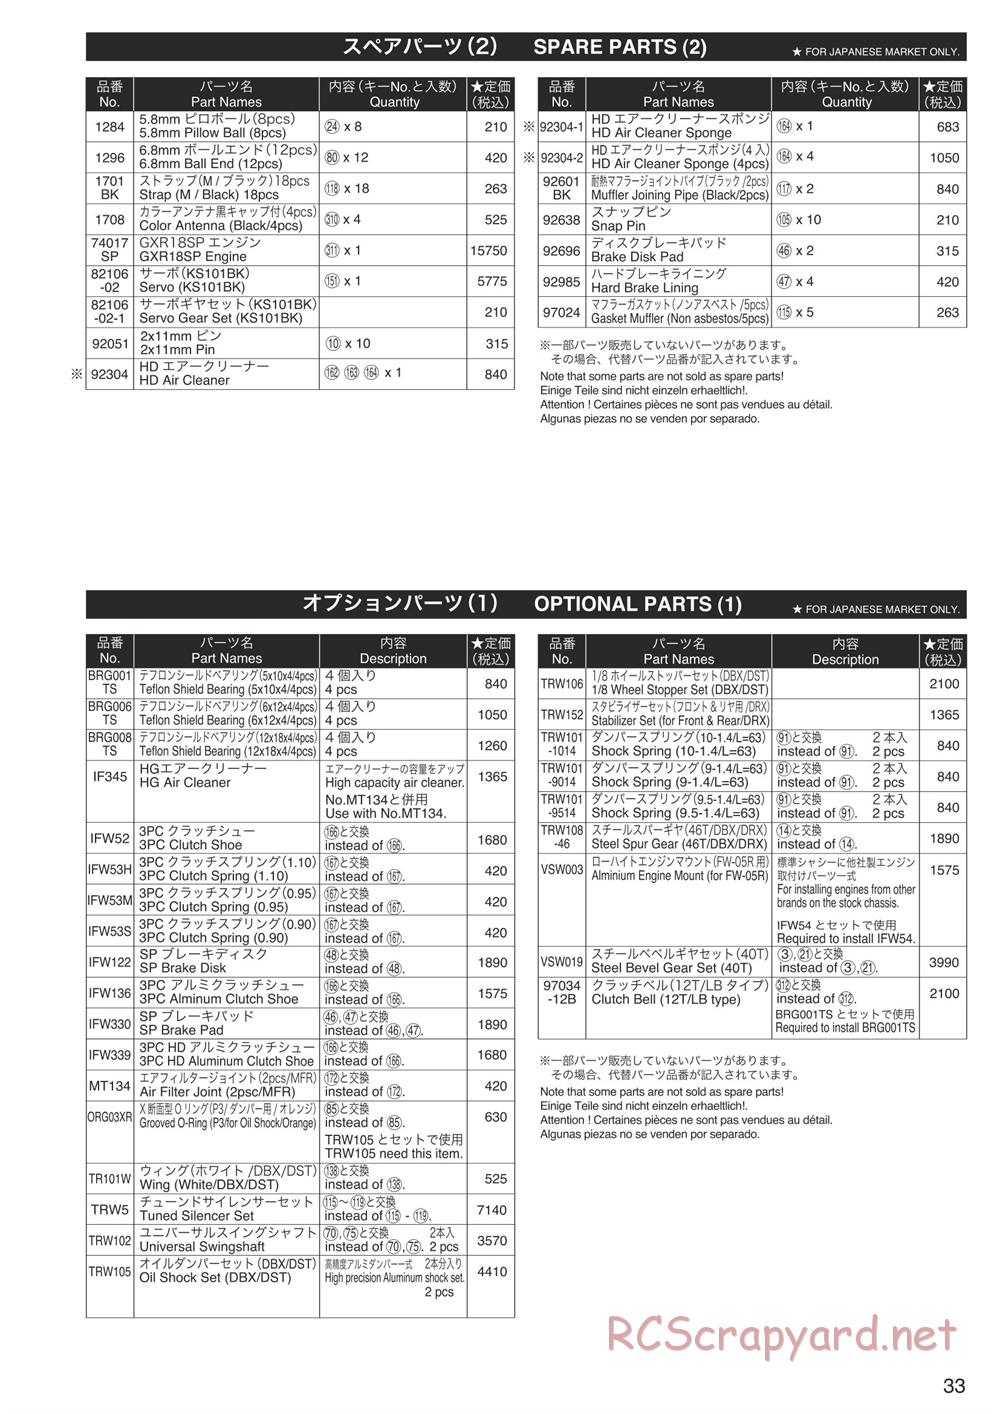 Kyosho - DBX 2.0 - Parts List - Page 2